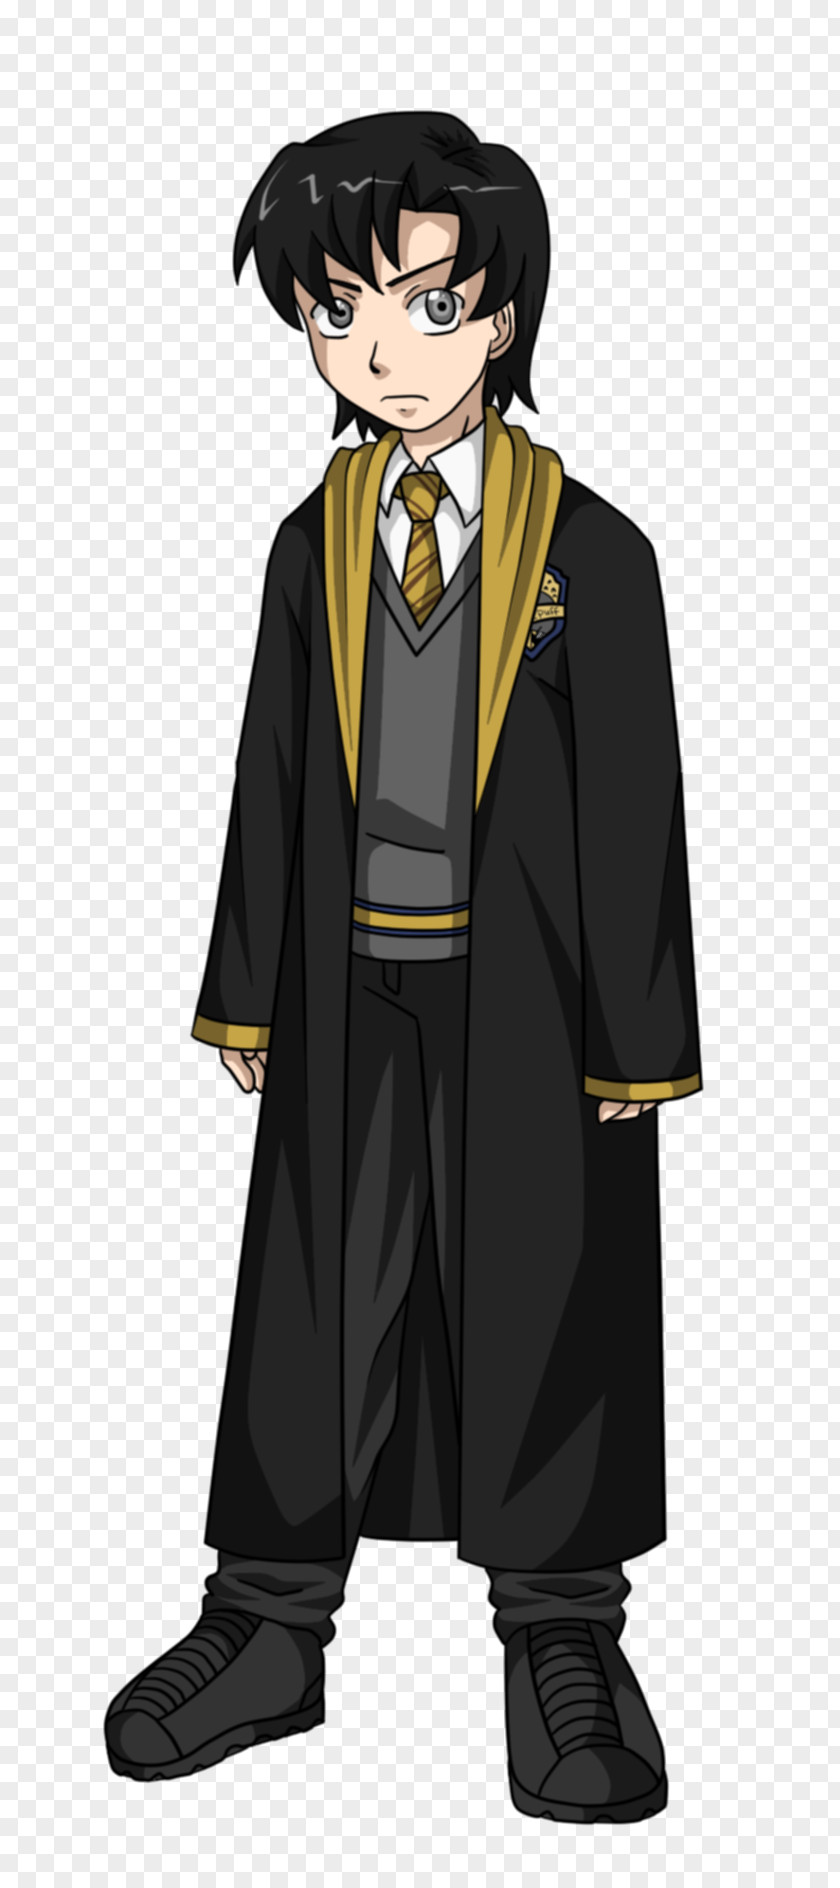 Harry Potter Nymphadora Lupin Dobby The House Elf Hogwarts Ravenclaw PNG